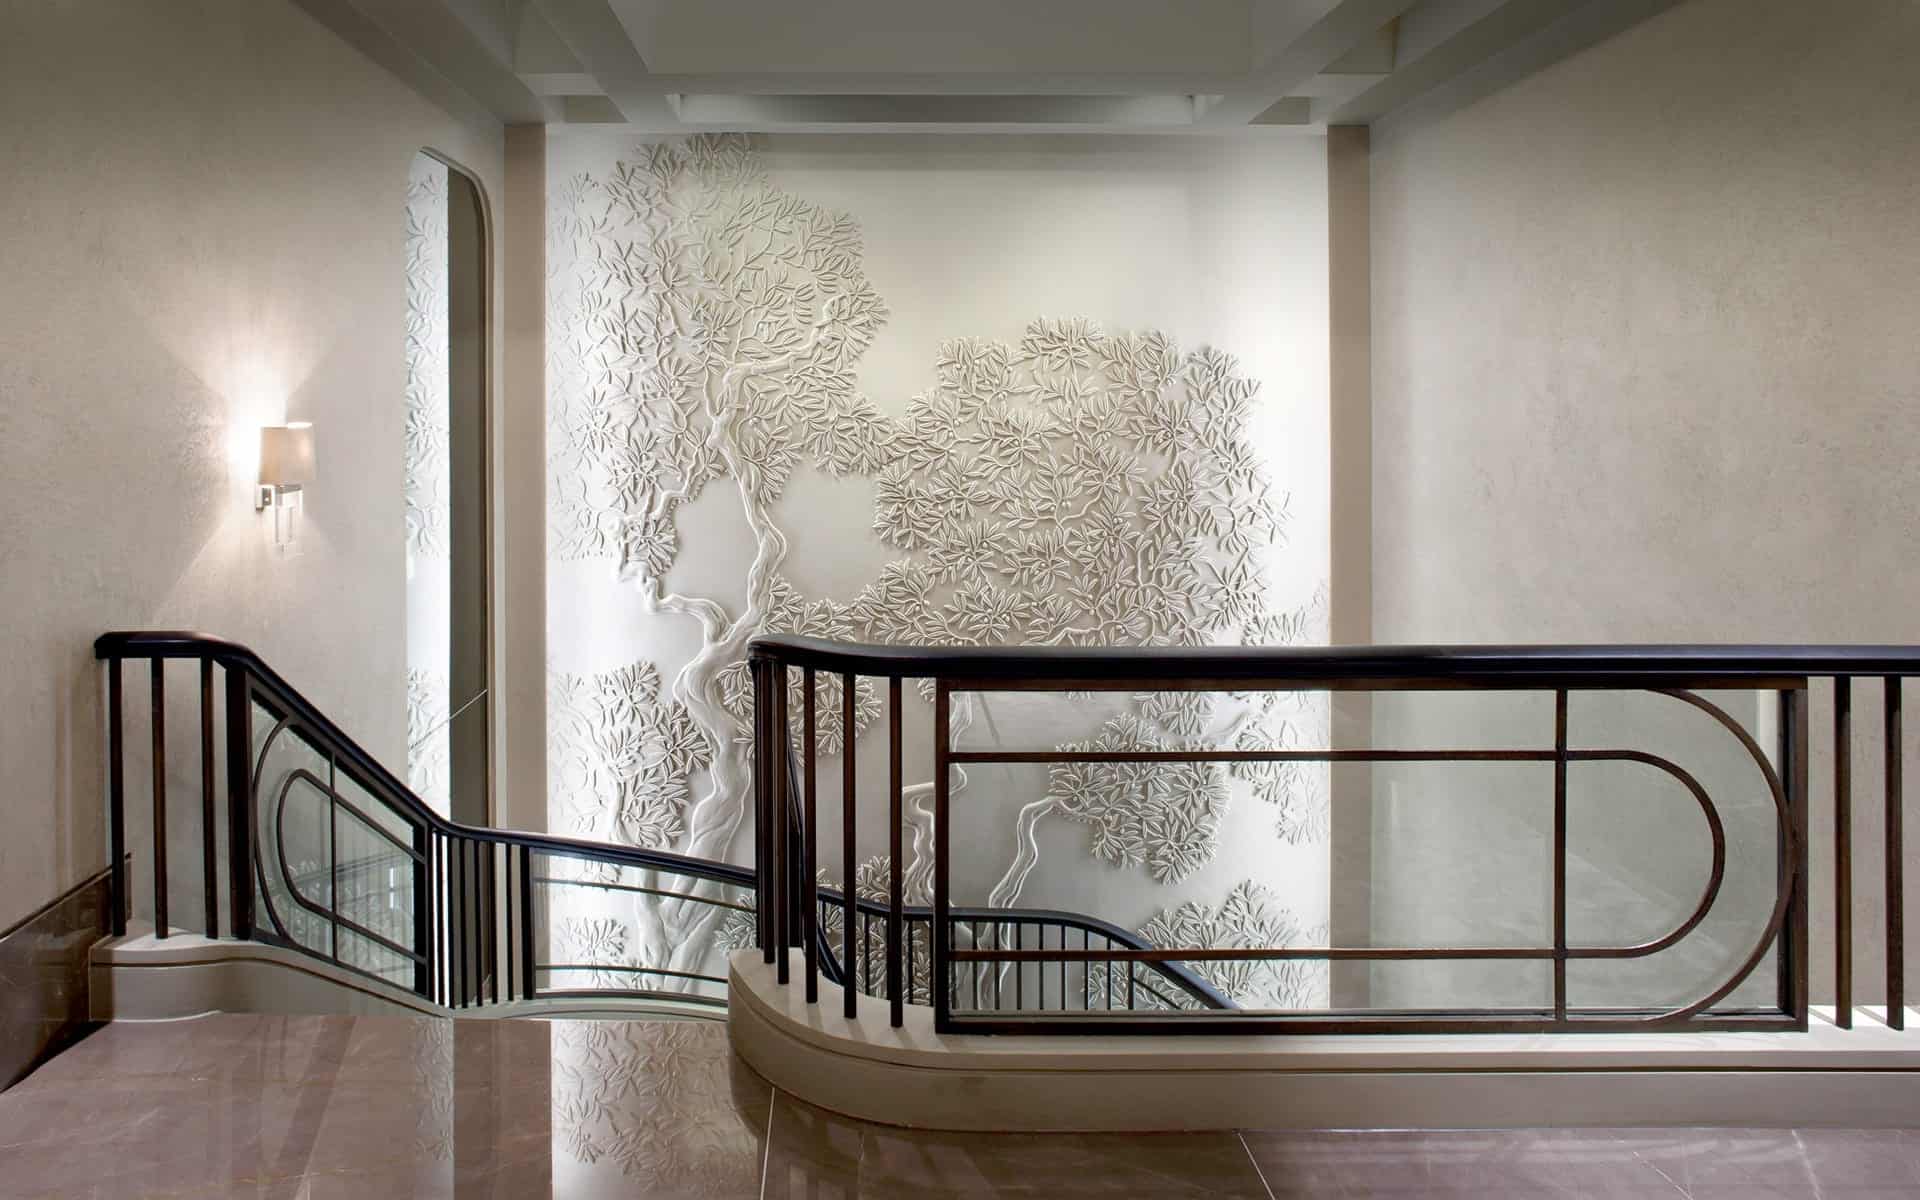 Olive tree staircase bas-relief, Photo by James Silverman, Interior Design project by René Dekker Design / SHH.